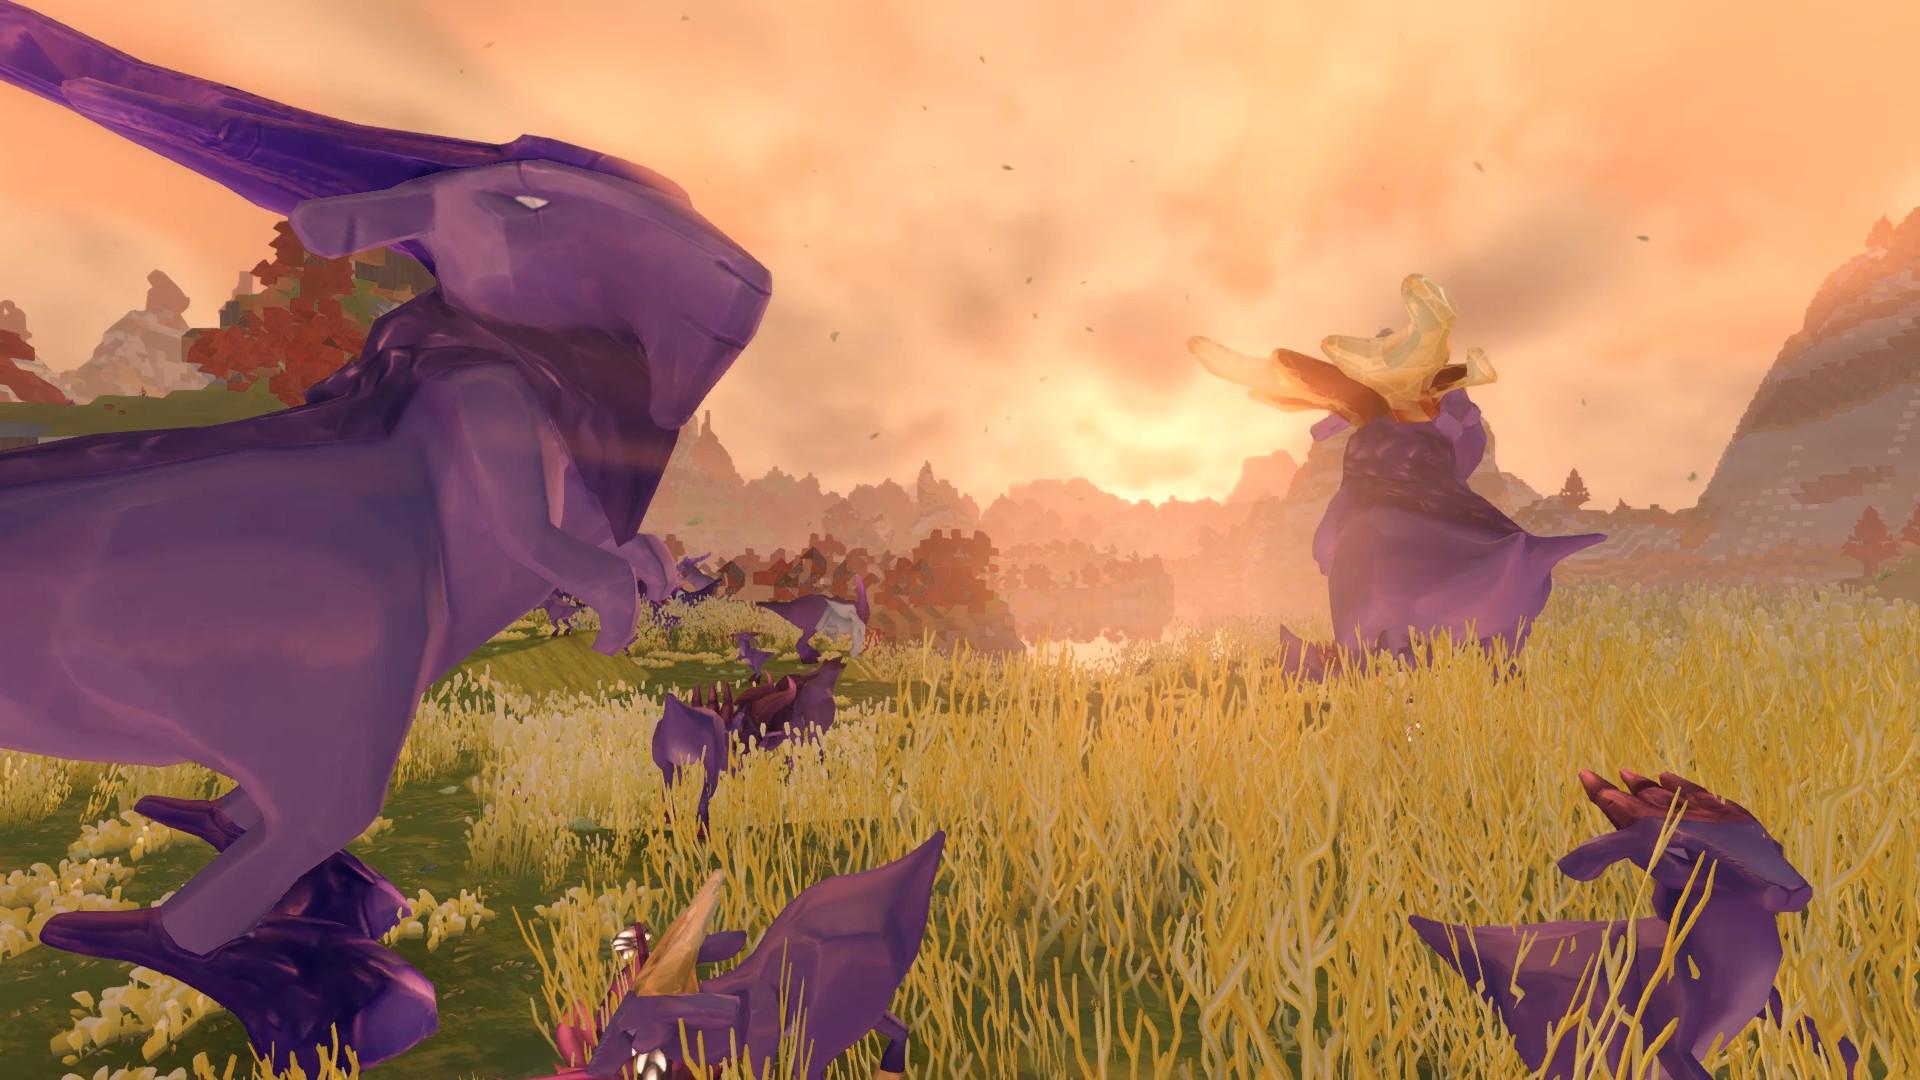 Screenshot №19 from game Boundless